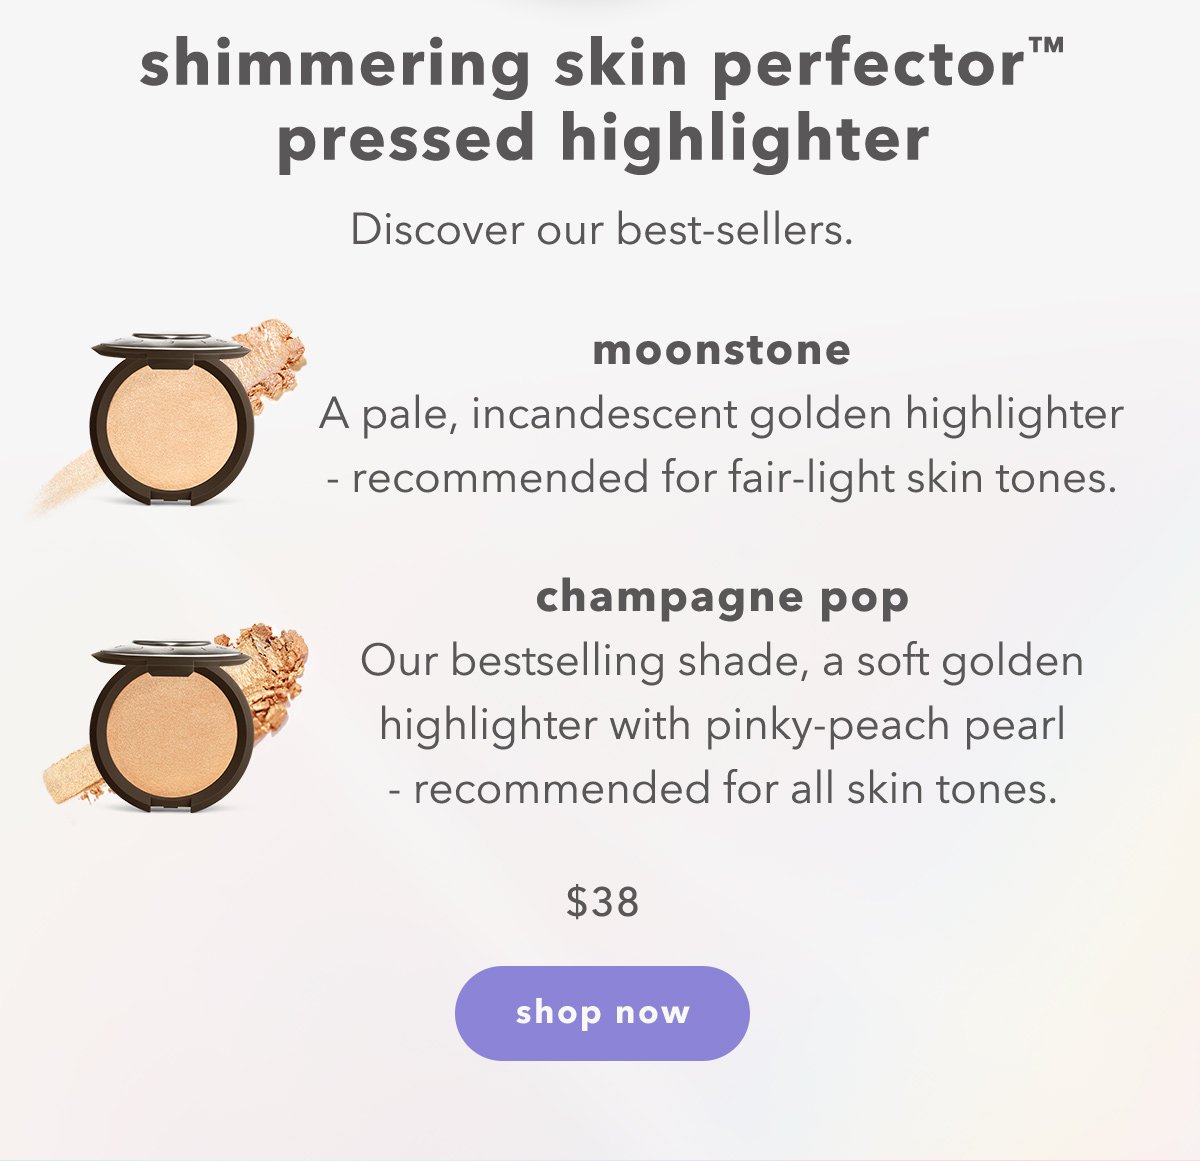 shimmering skin perfector pressed highlighter | Discover our best-sellers. | Moonstone: A pale, incandescent golden highlighter - recommended for fair-light skin tones. | champagne pop: Our bestselling shade, a soft golden highlighter with pinky-peach pearl - recommended for all skin tones. | $38 shop now